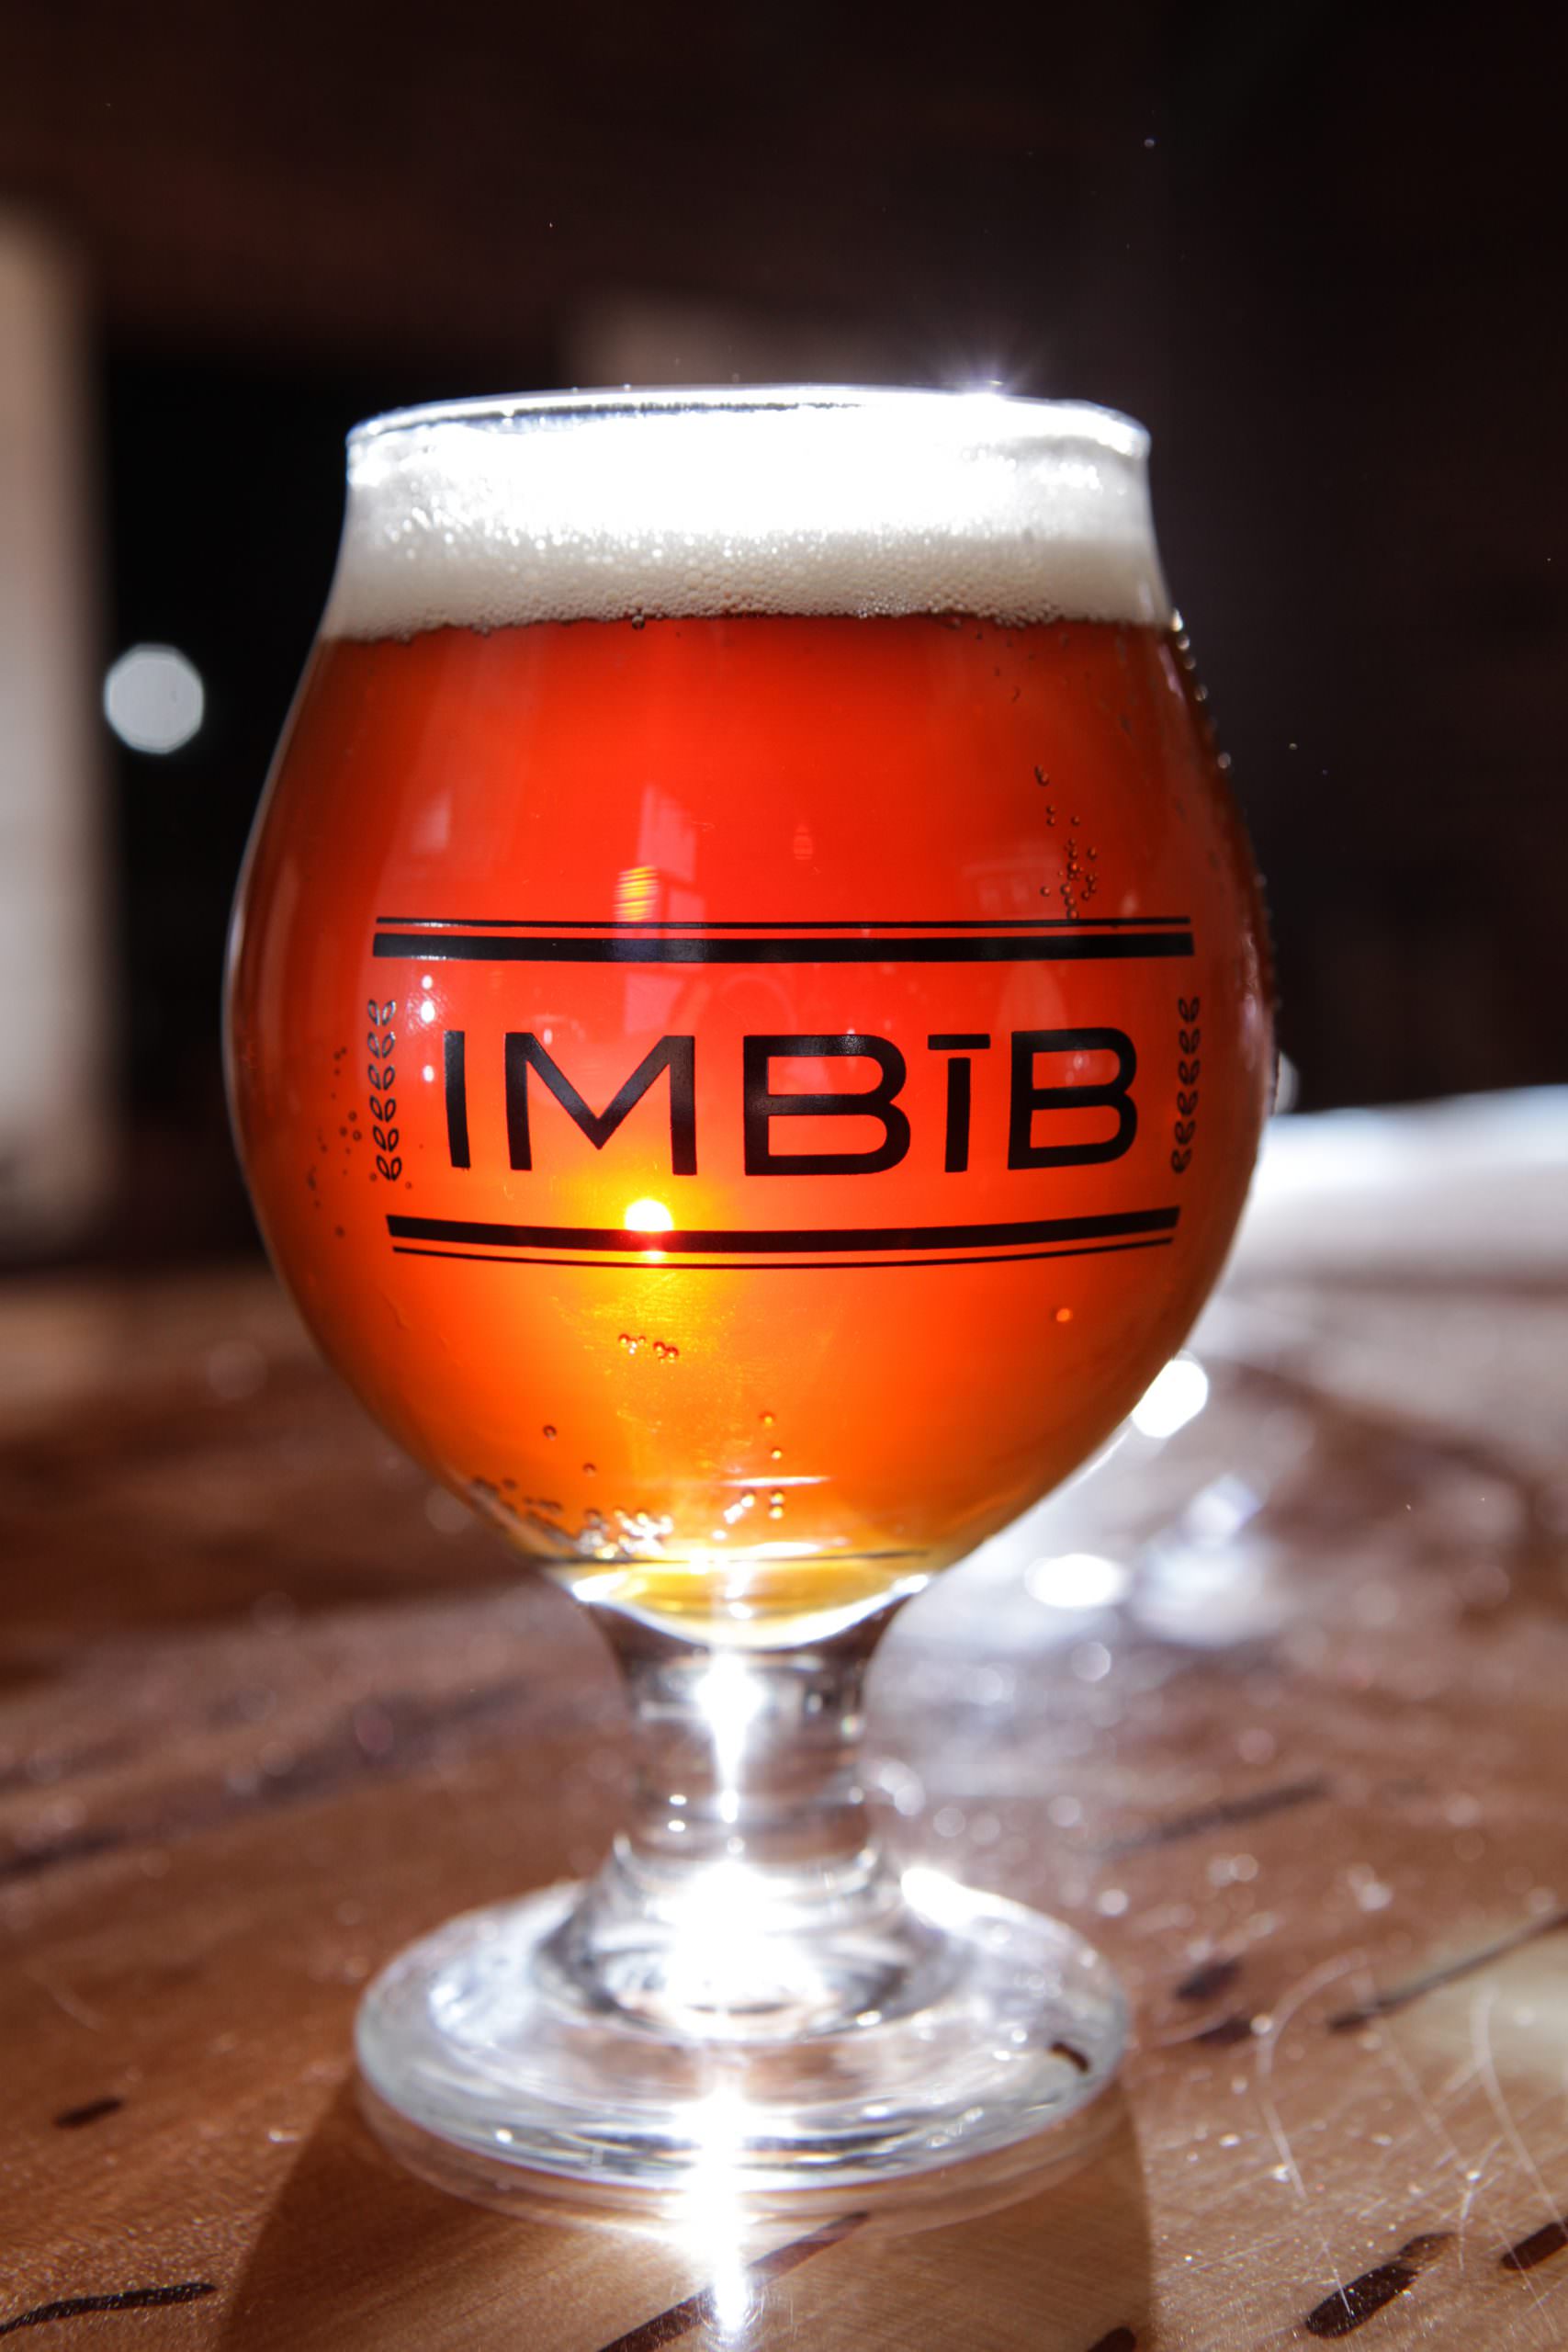 IMBIB took home two medals from 2018 Great American Beer Festival